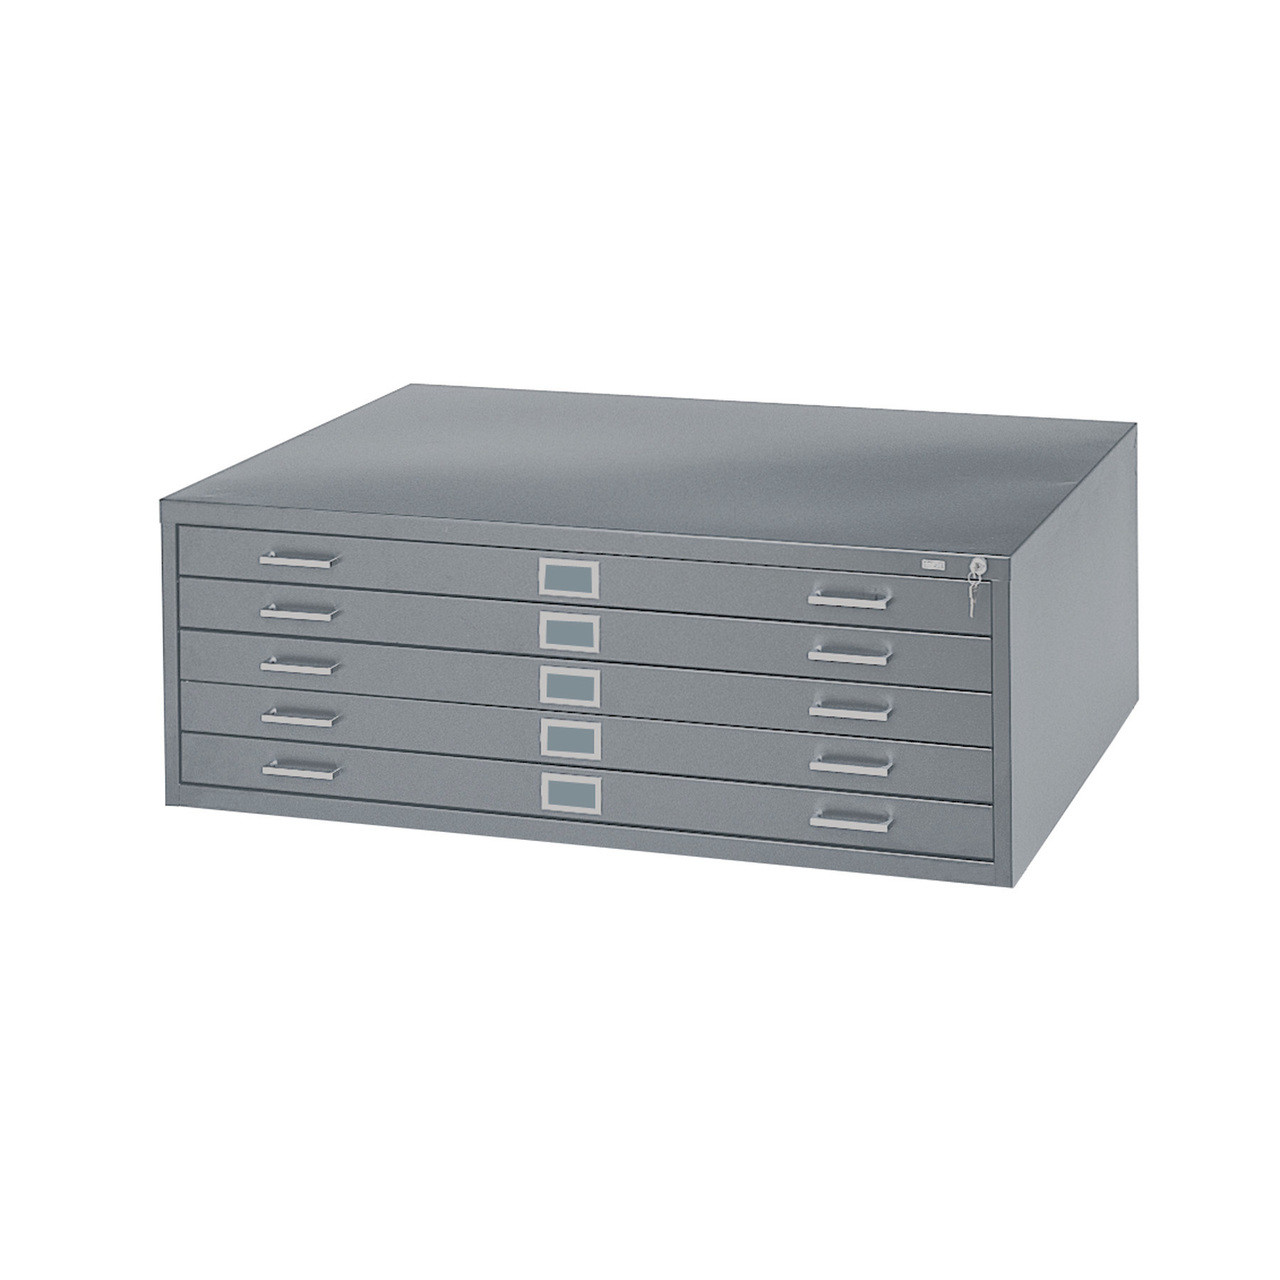 Safco 5-Drawer Steel Flat File for 24" x 36" Documents